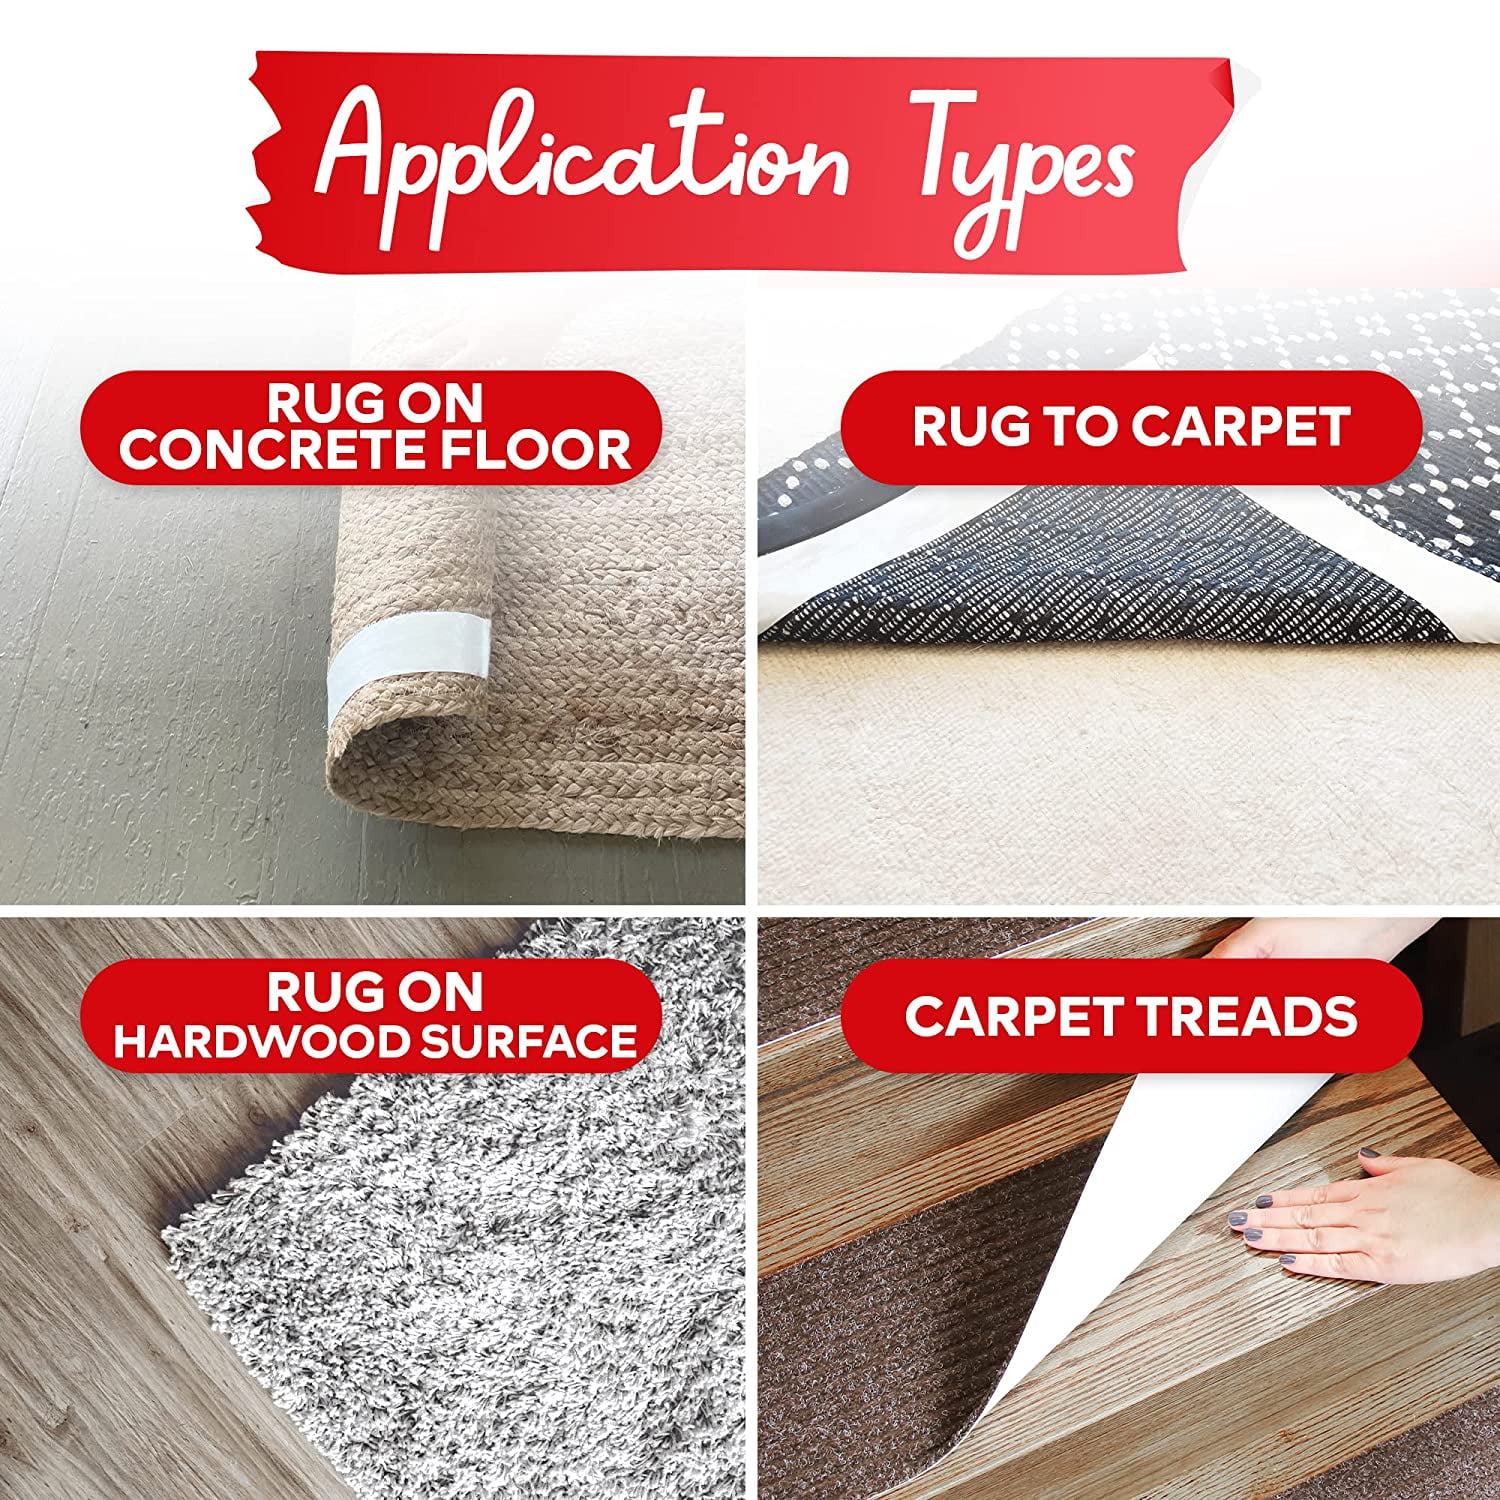 The Good Stuff Rug Gripper Tape for Hardwood and Laminate Floors [10 Yards/Extreme Strength] Keep Rug in Place on Carpet, Laminate, tiles, and Wooden